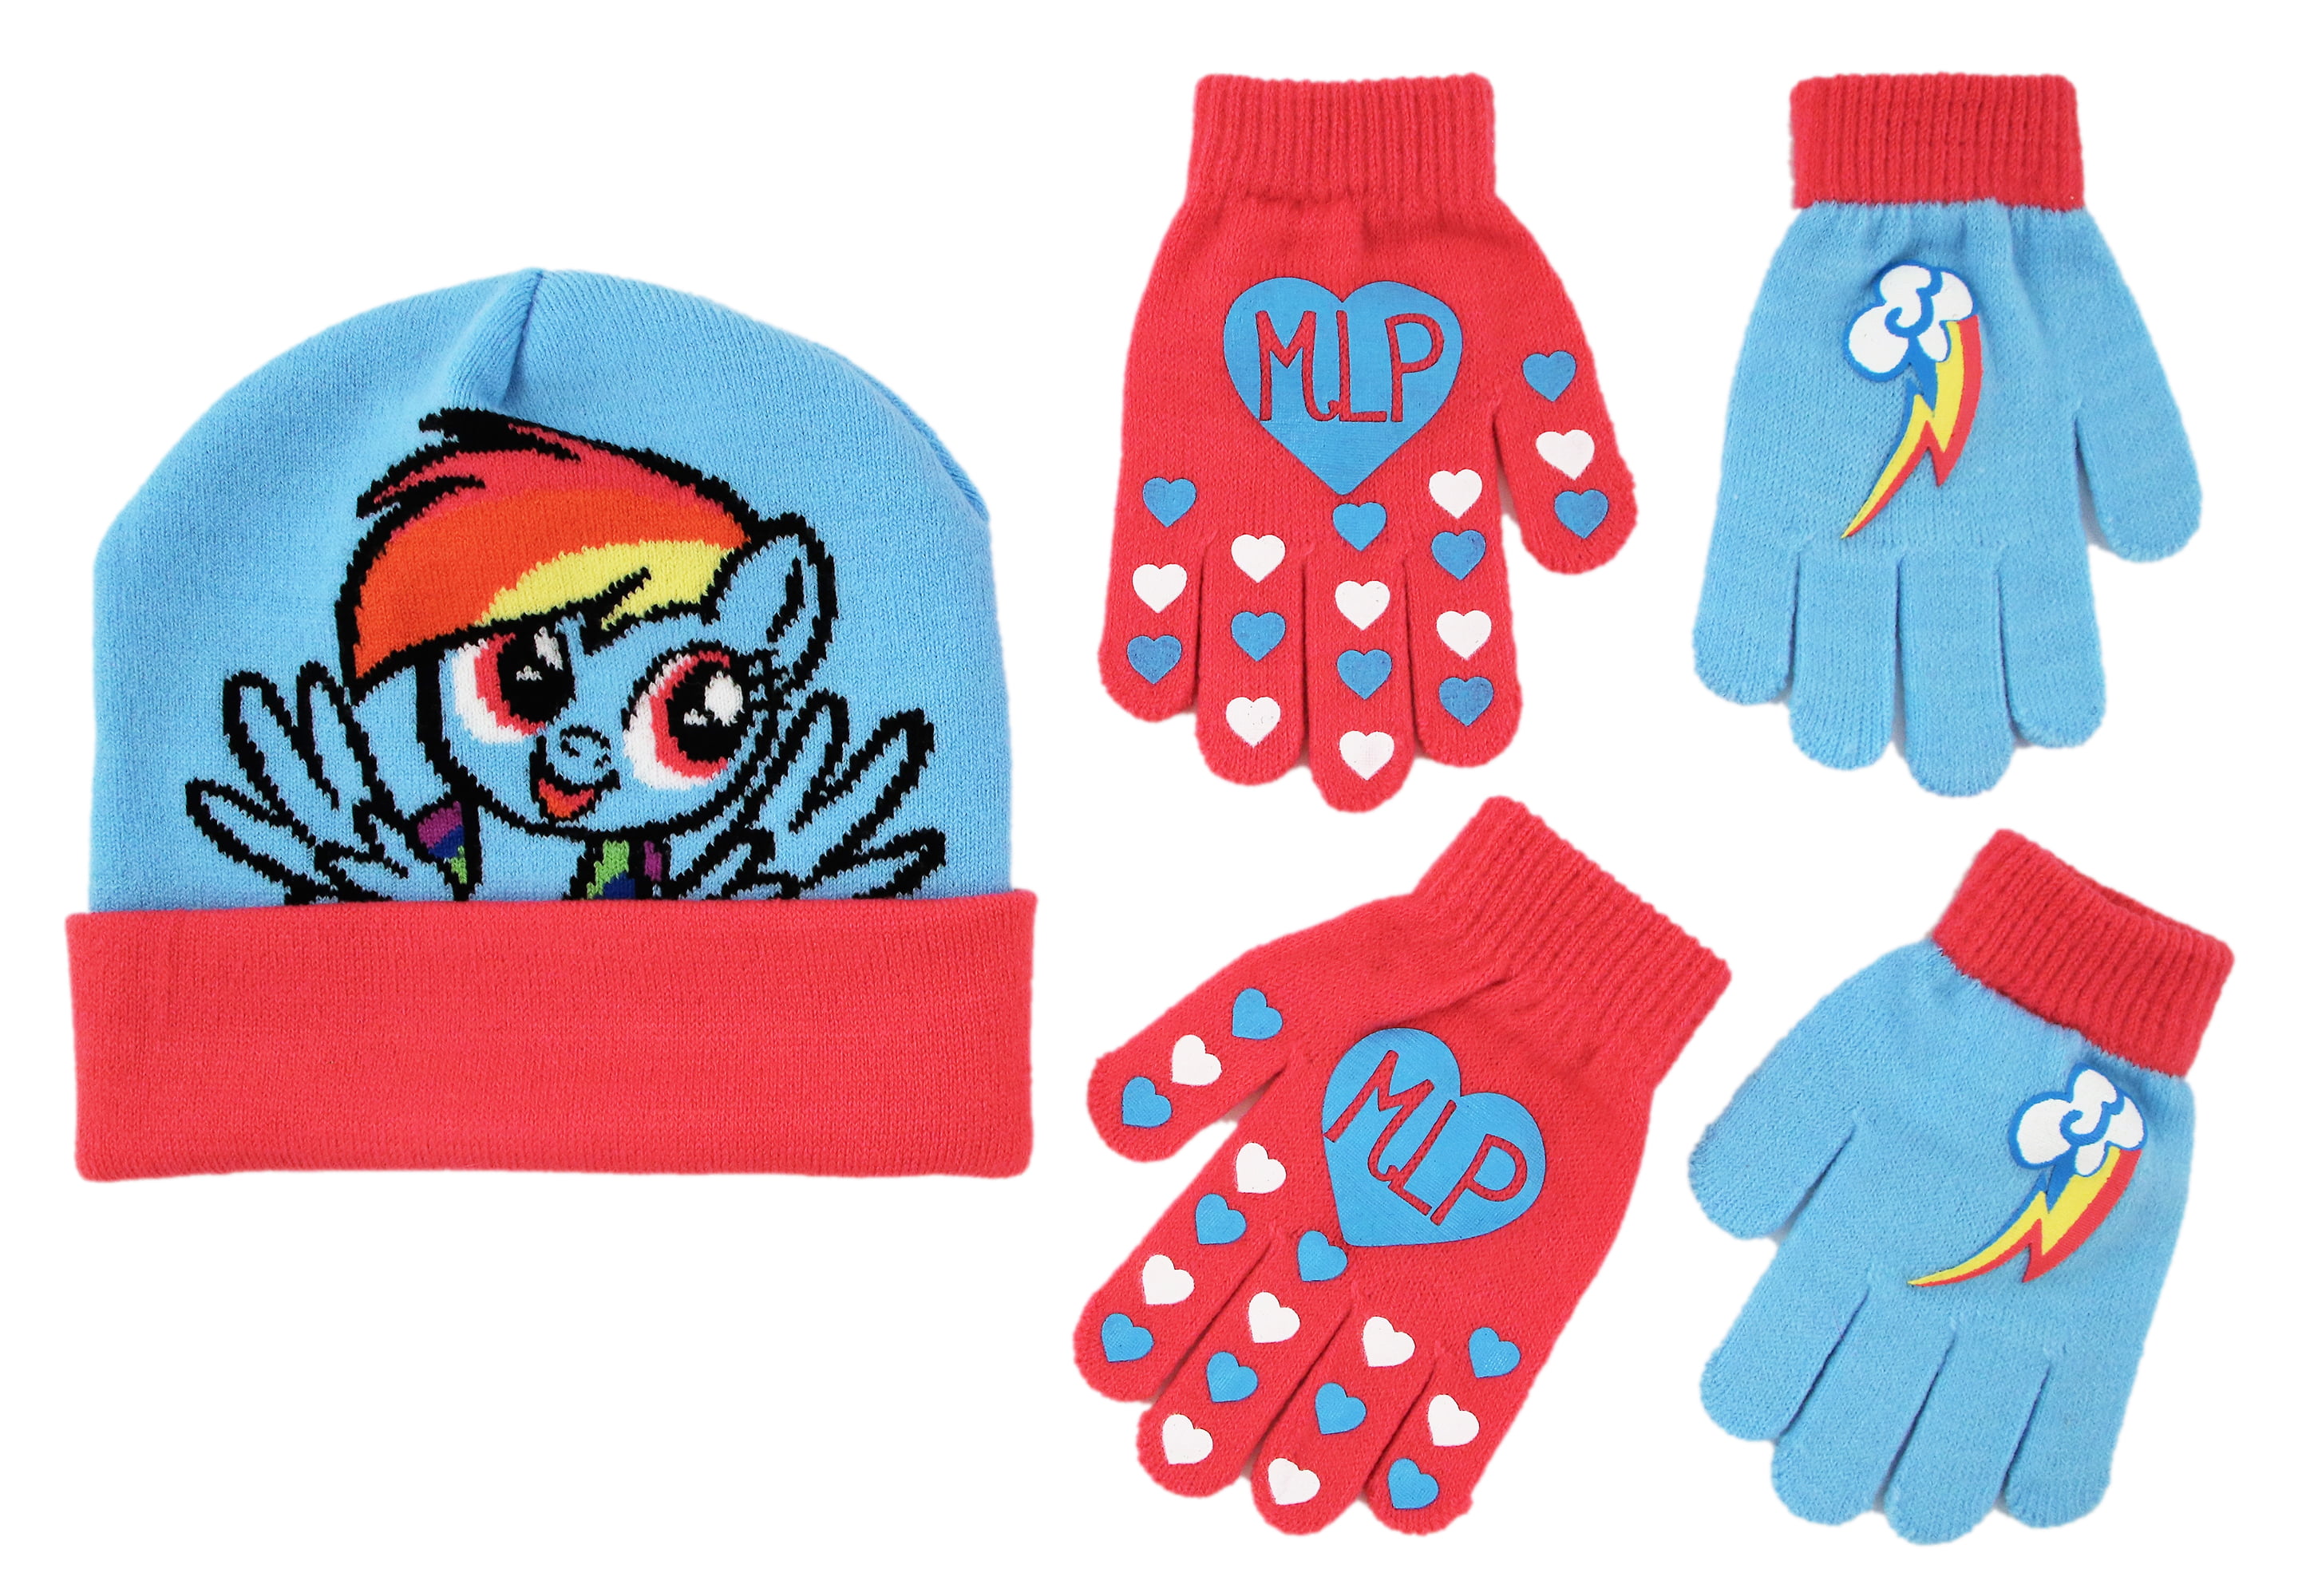 Hasbro Kids Winter Hat, Kids Gloves or Toddlers Mittens, My Little Pony Baby Beanie for Girl Ages 4-7